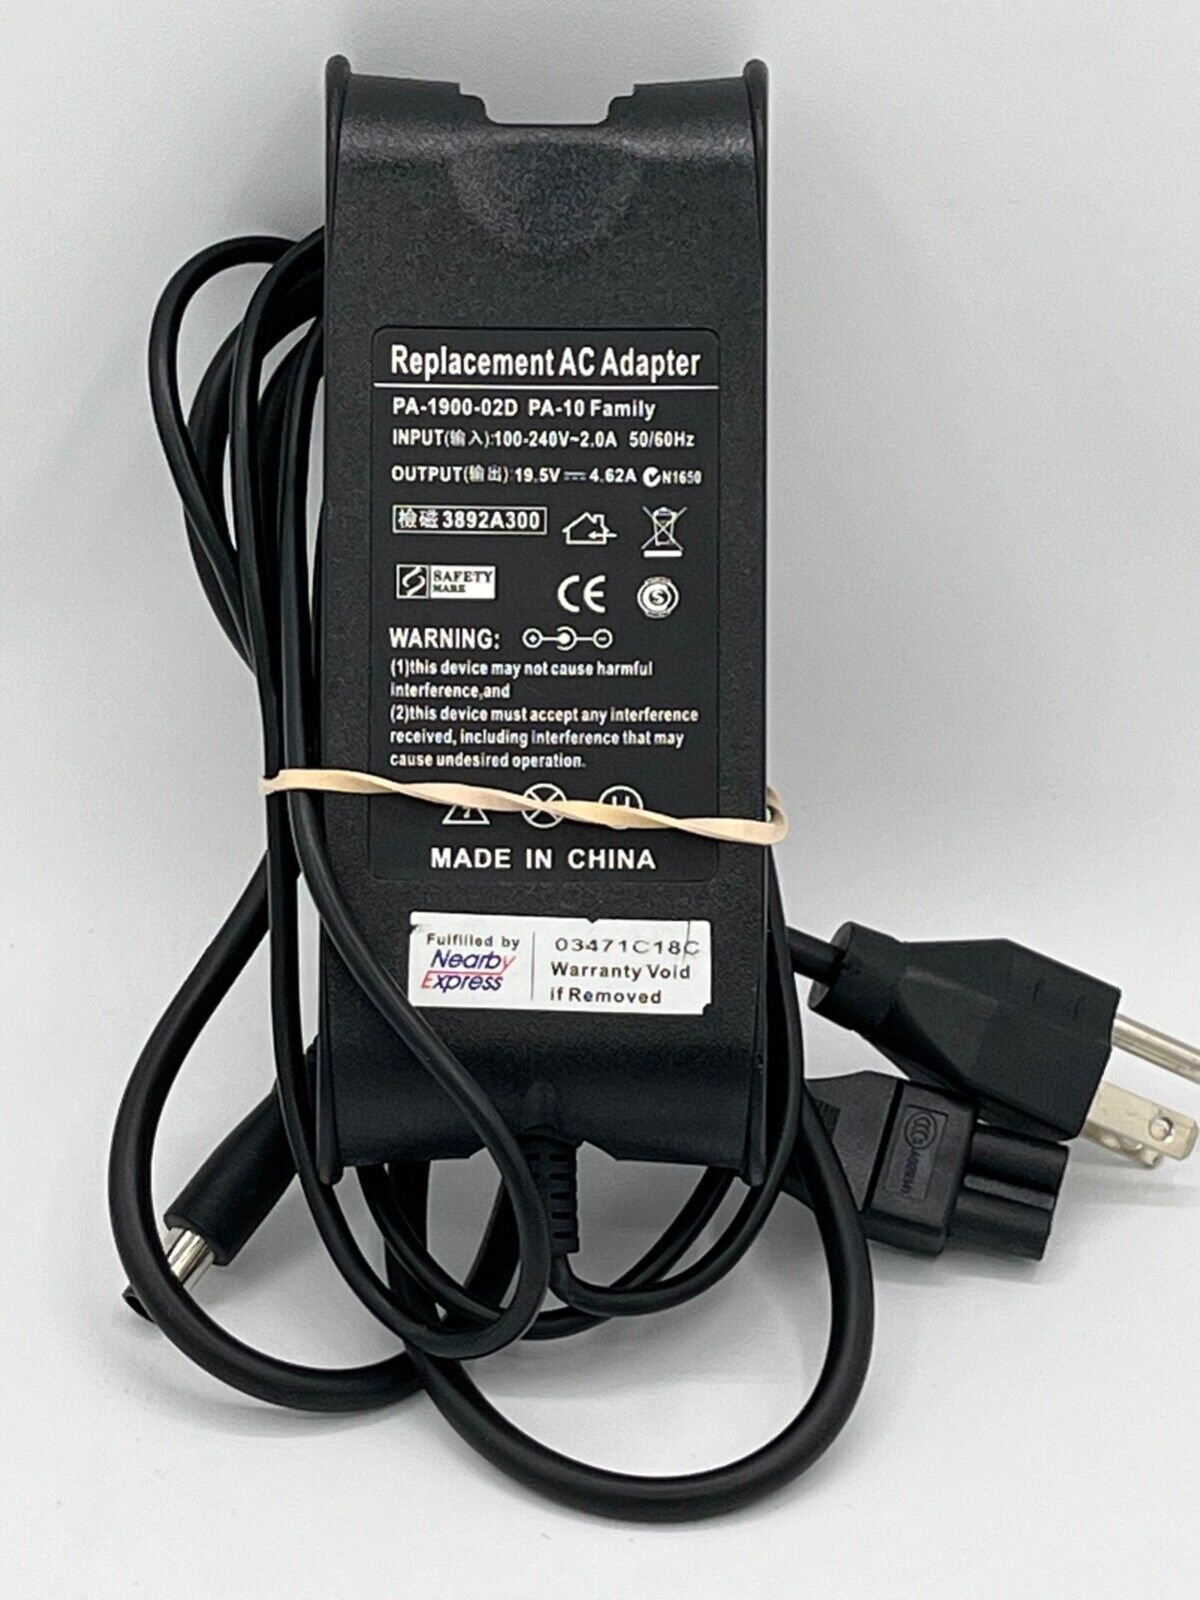 Replacement AC Adapter PA-1900-02D PA-10 Family Pre-Owned Tested Very Good